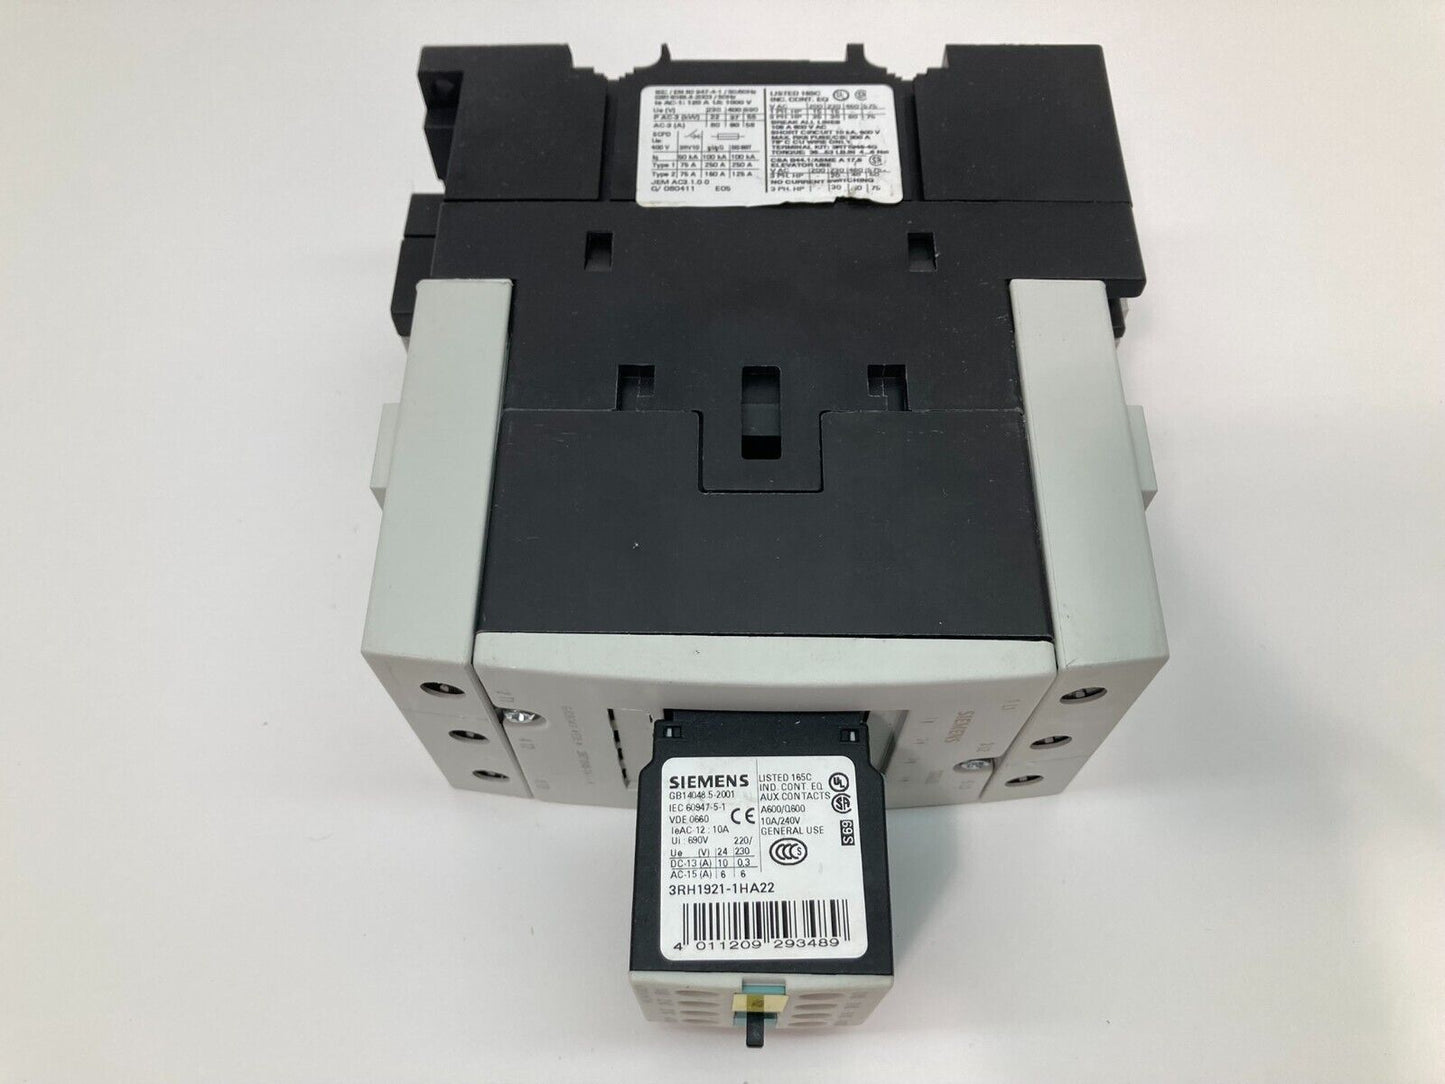 SIEMENS 3RT1045-1A 105A CONTACTOR with 3RH1921-1HA22